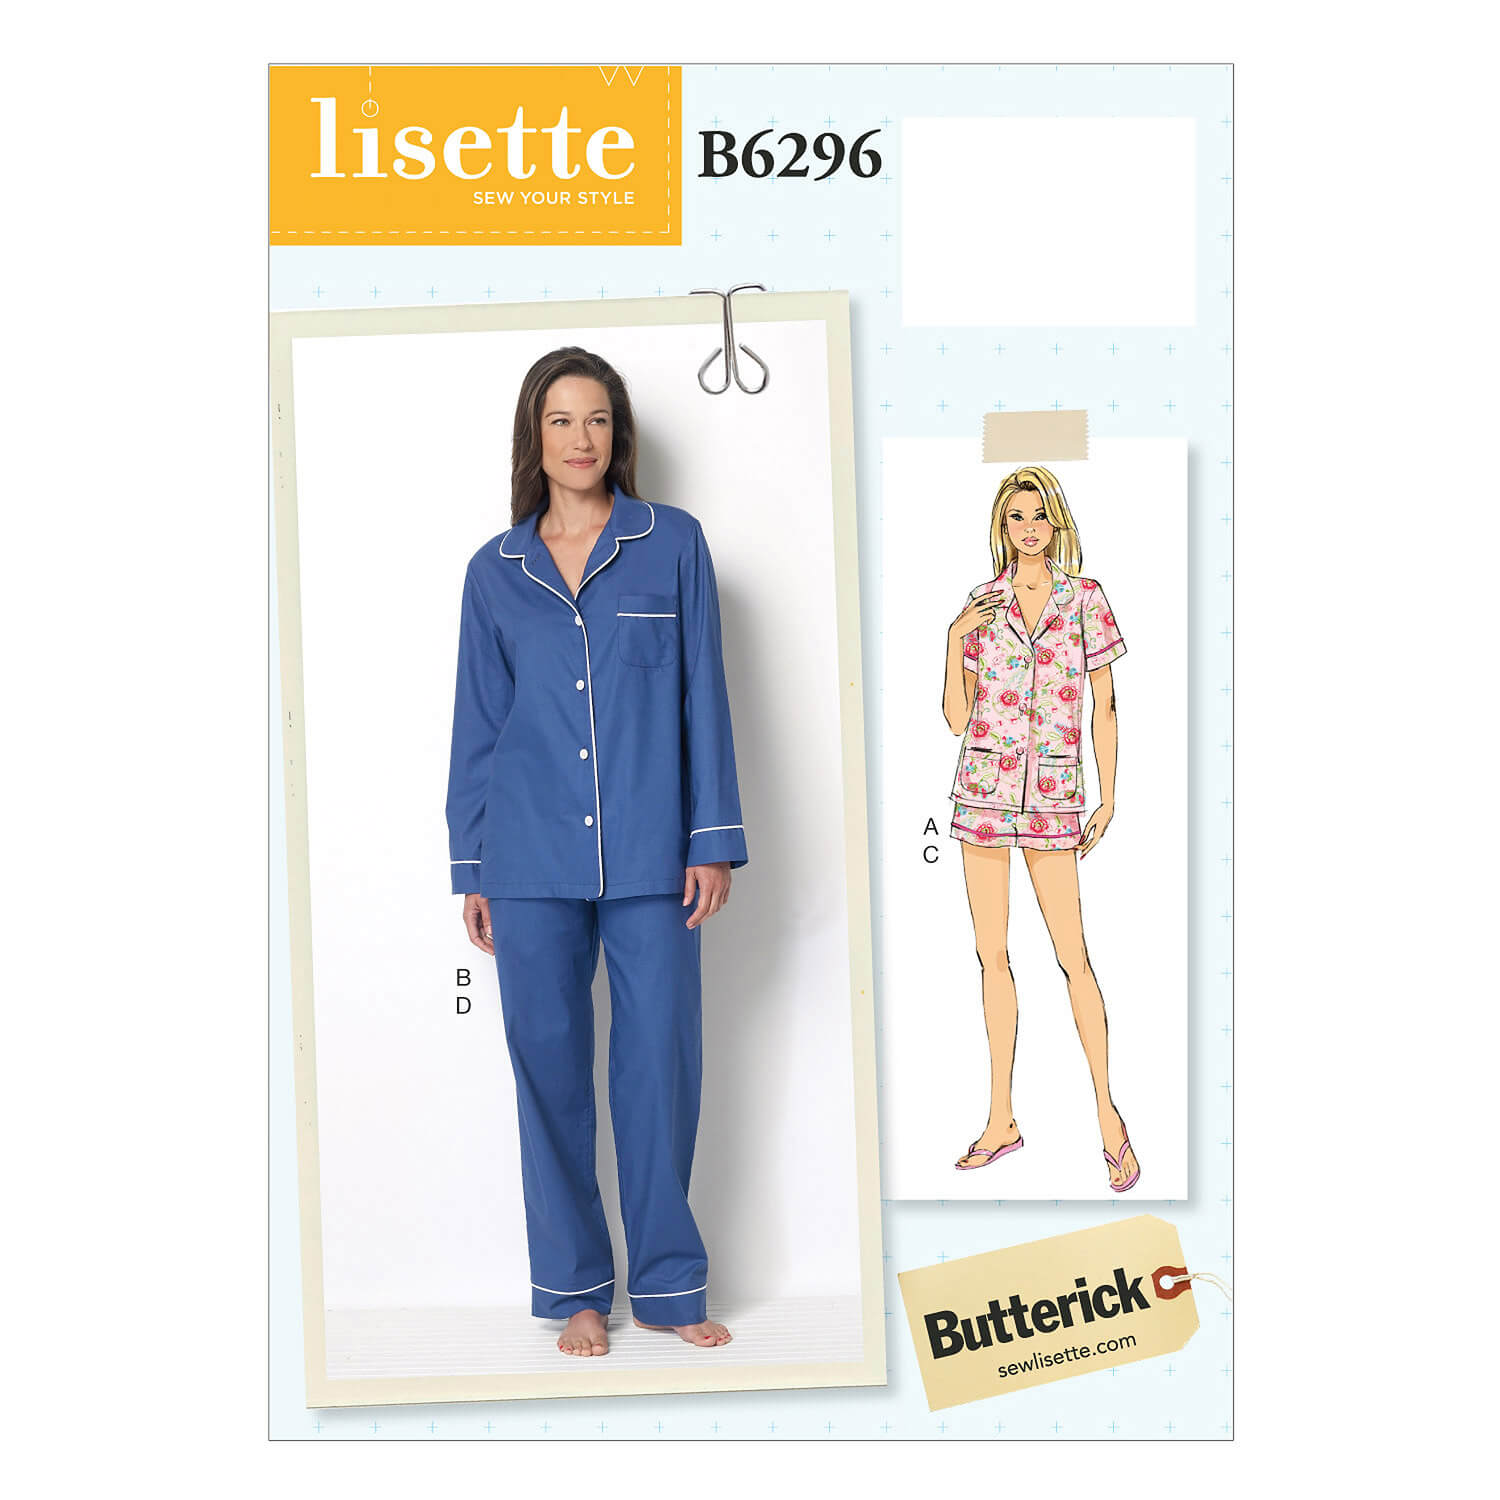 Butterick Sewing Pattern B6296 Lisette Misses' Top, Shorts and Pants